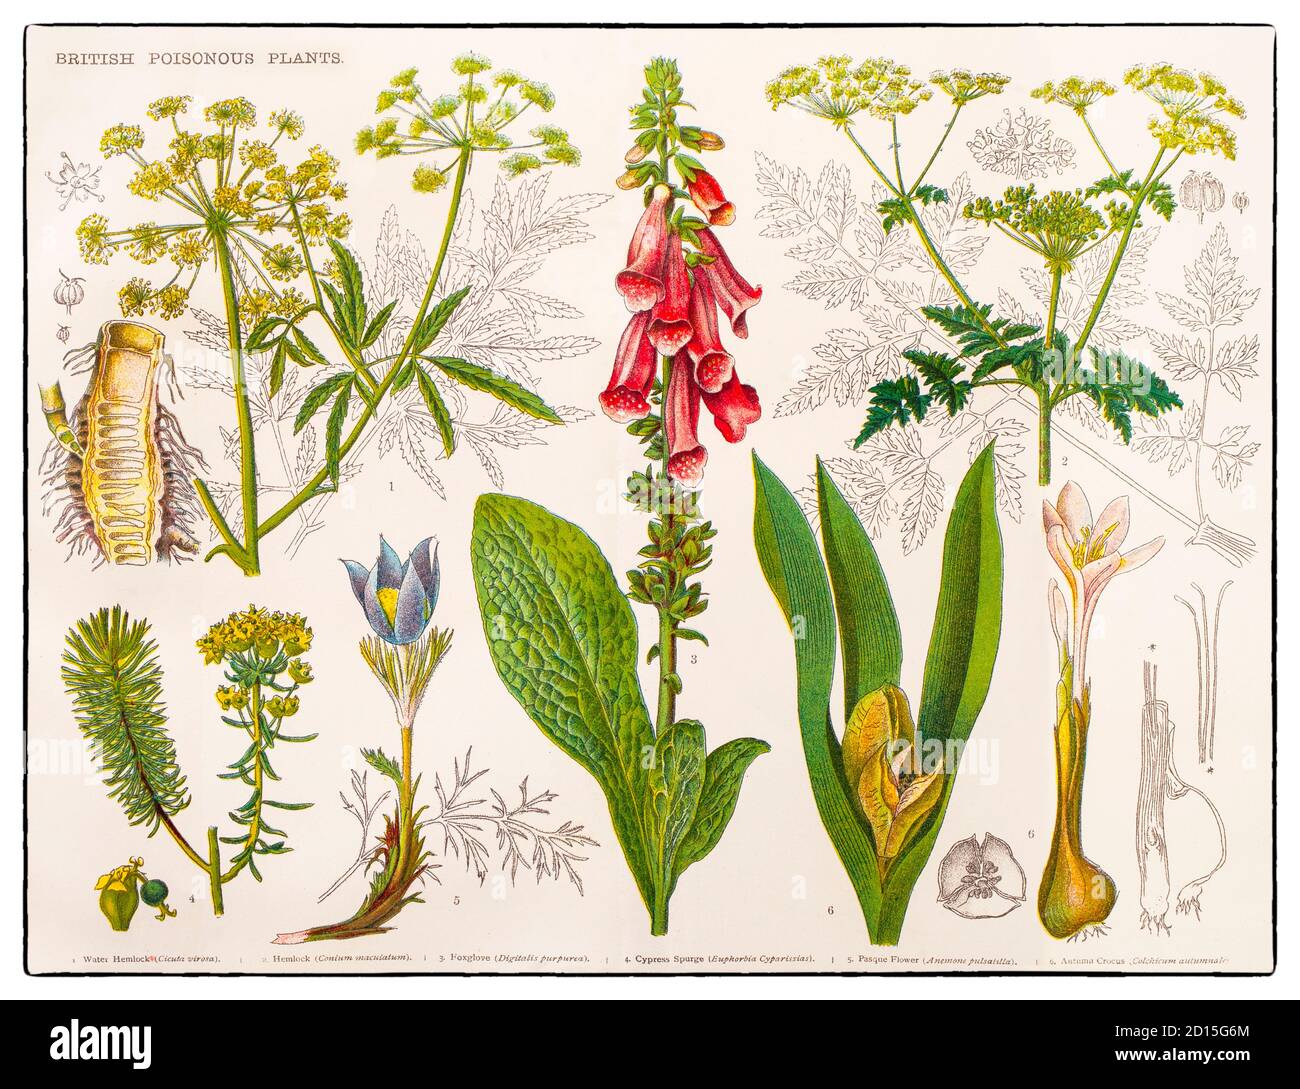 A late 19th Century chart illustrating various British poisonous plants  . those that produce toxins that deter herbivores from consuming them.  Plants cannot move to escape their predators, so they must have